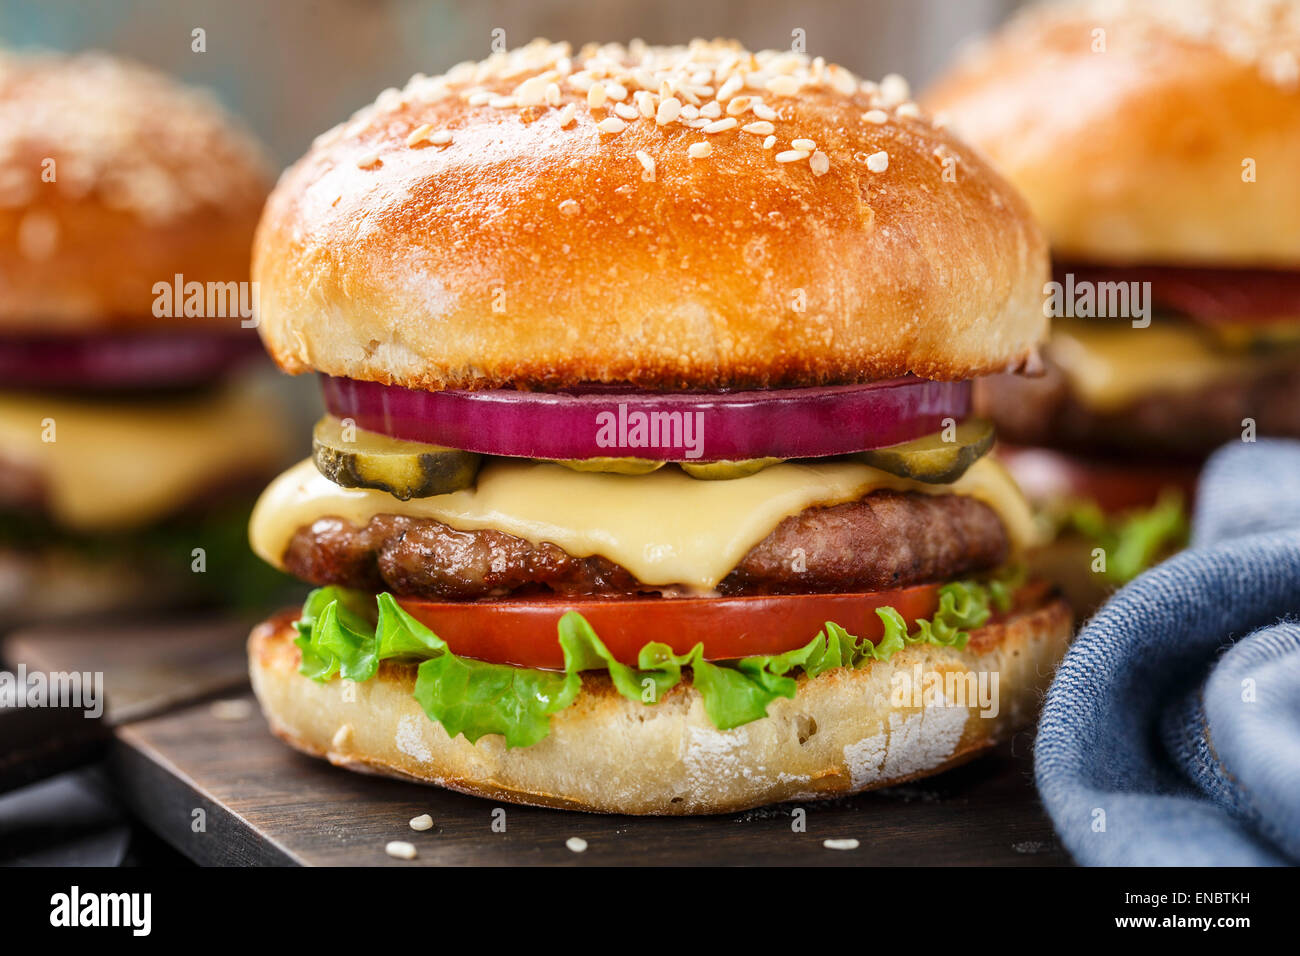 Delicious burger with beef, bacon, cheese and vegetables Stock Photo